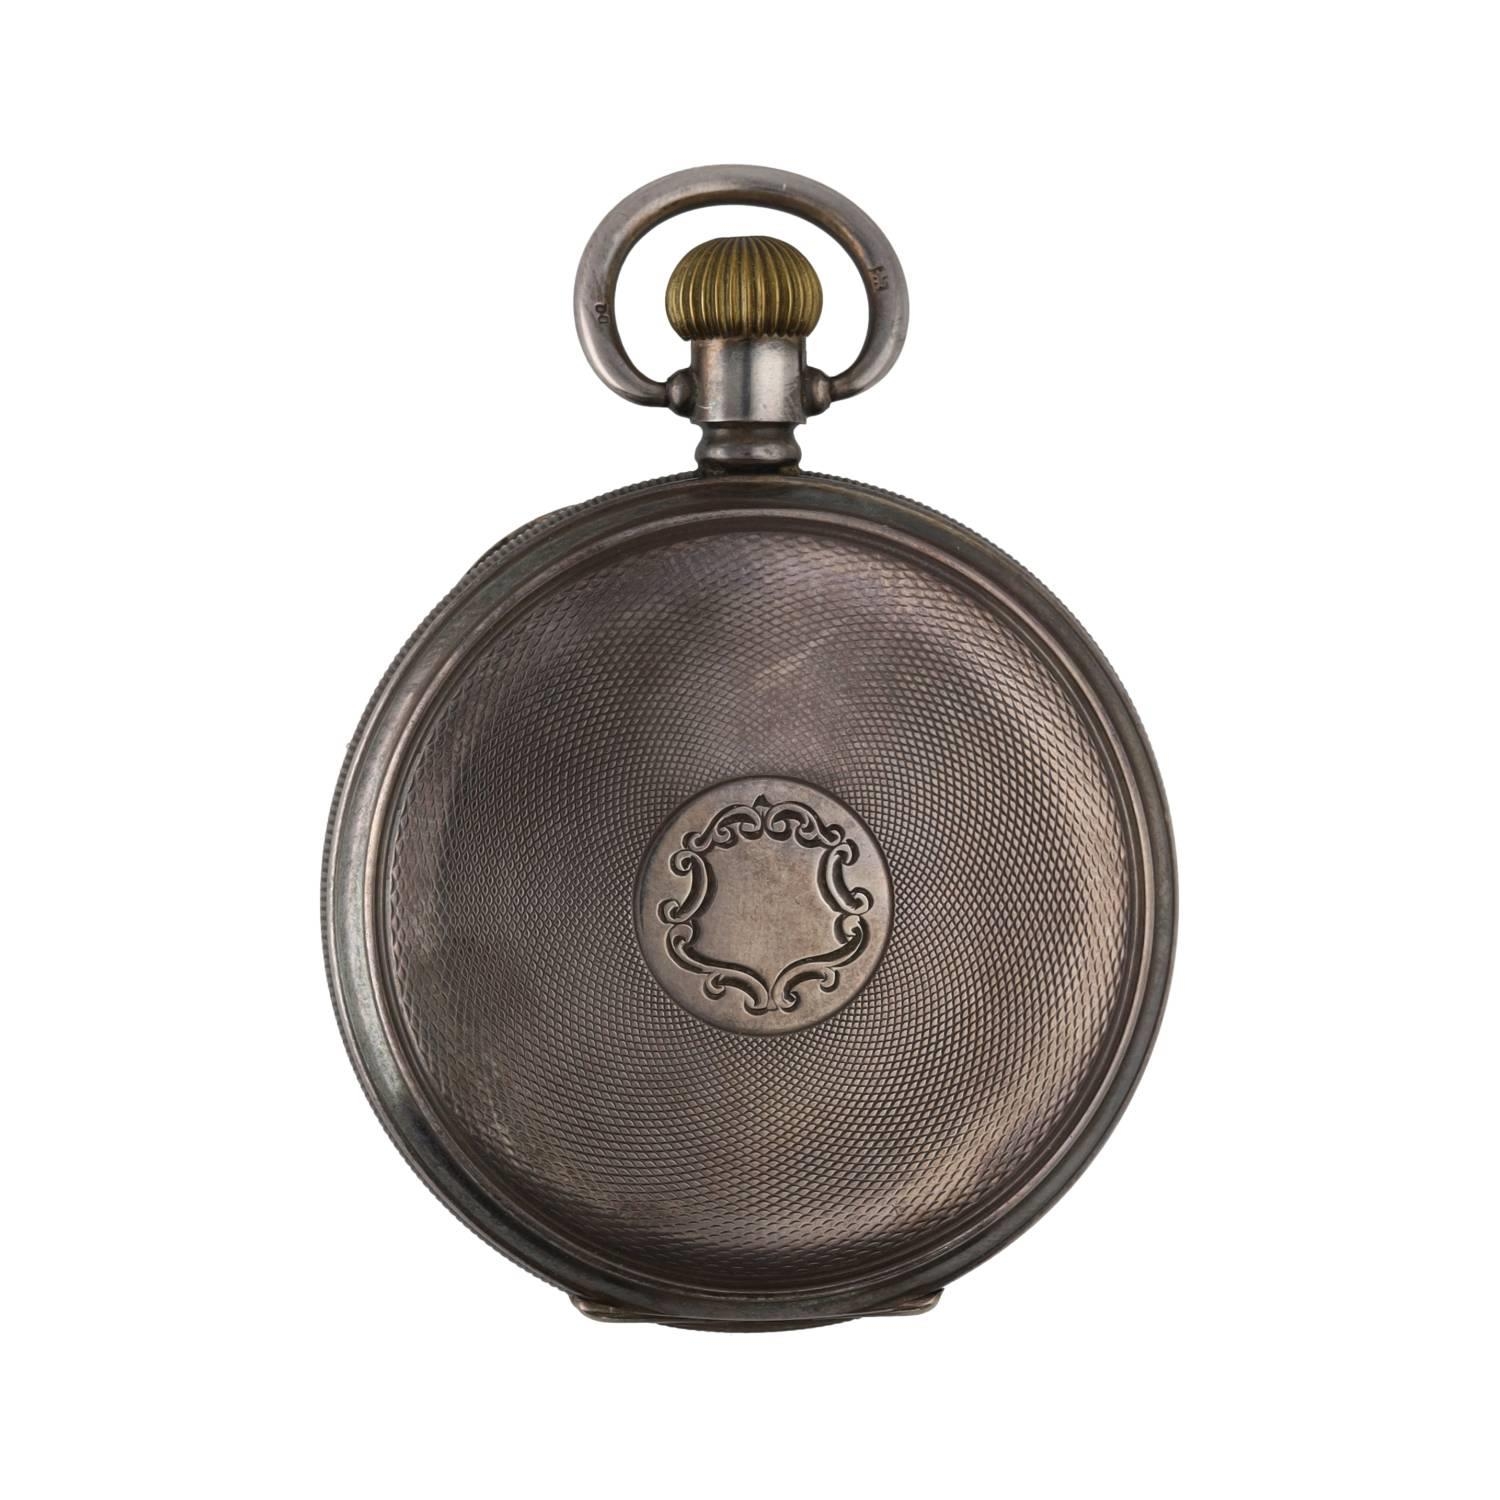 American Waltham 'Braille' silver lever hunter pocket watch, circa 1917, serial no. 21608887, signed - Image 4 of 5